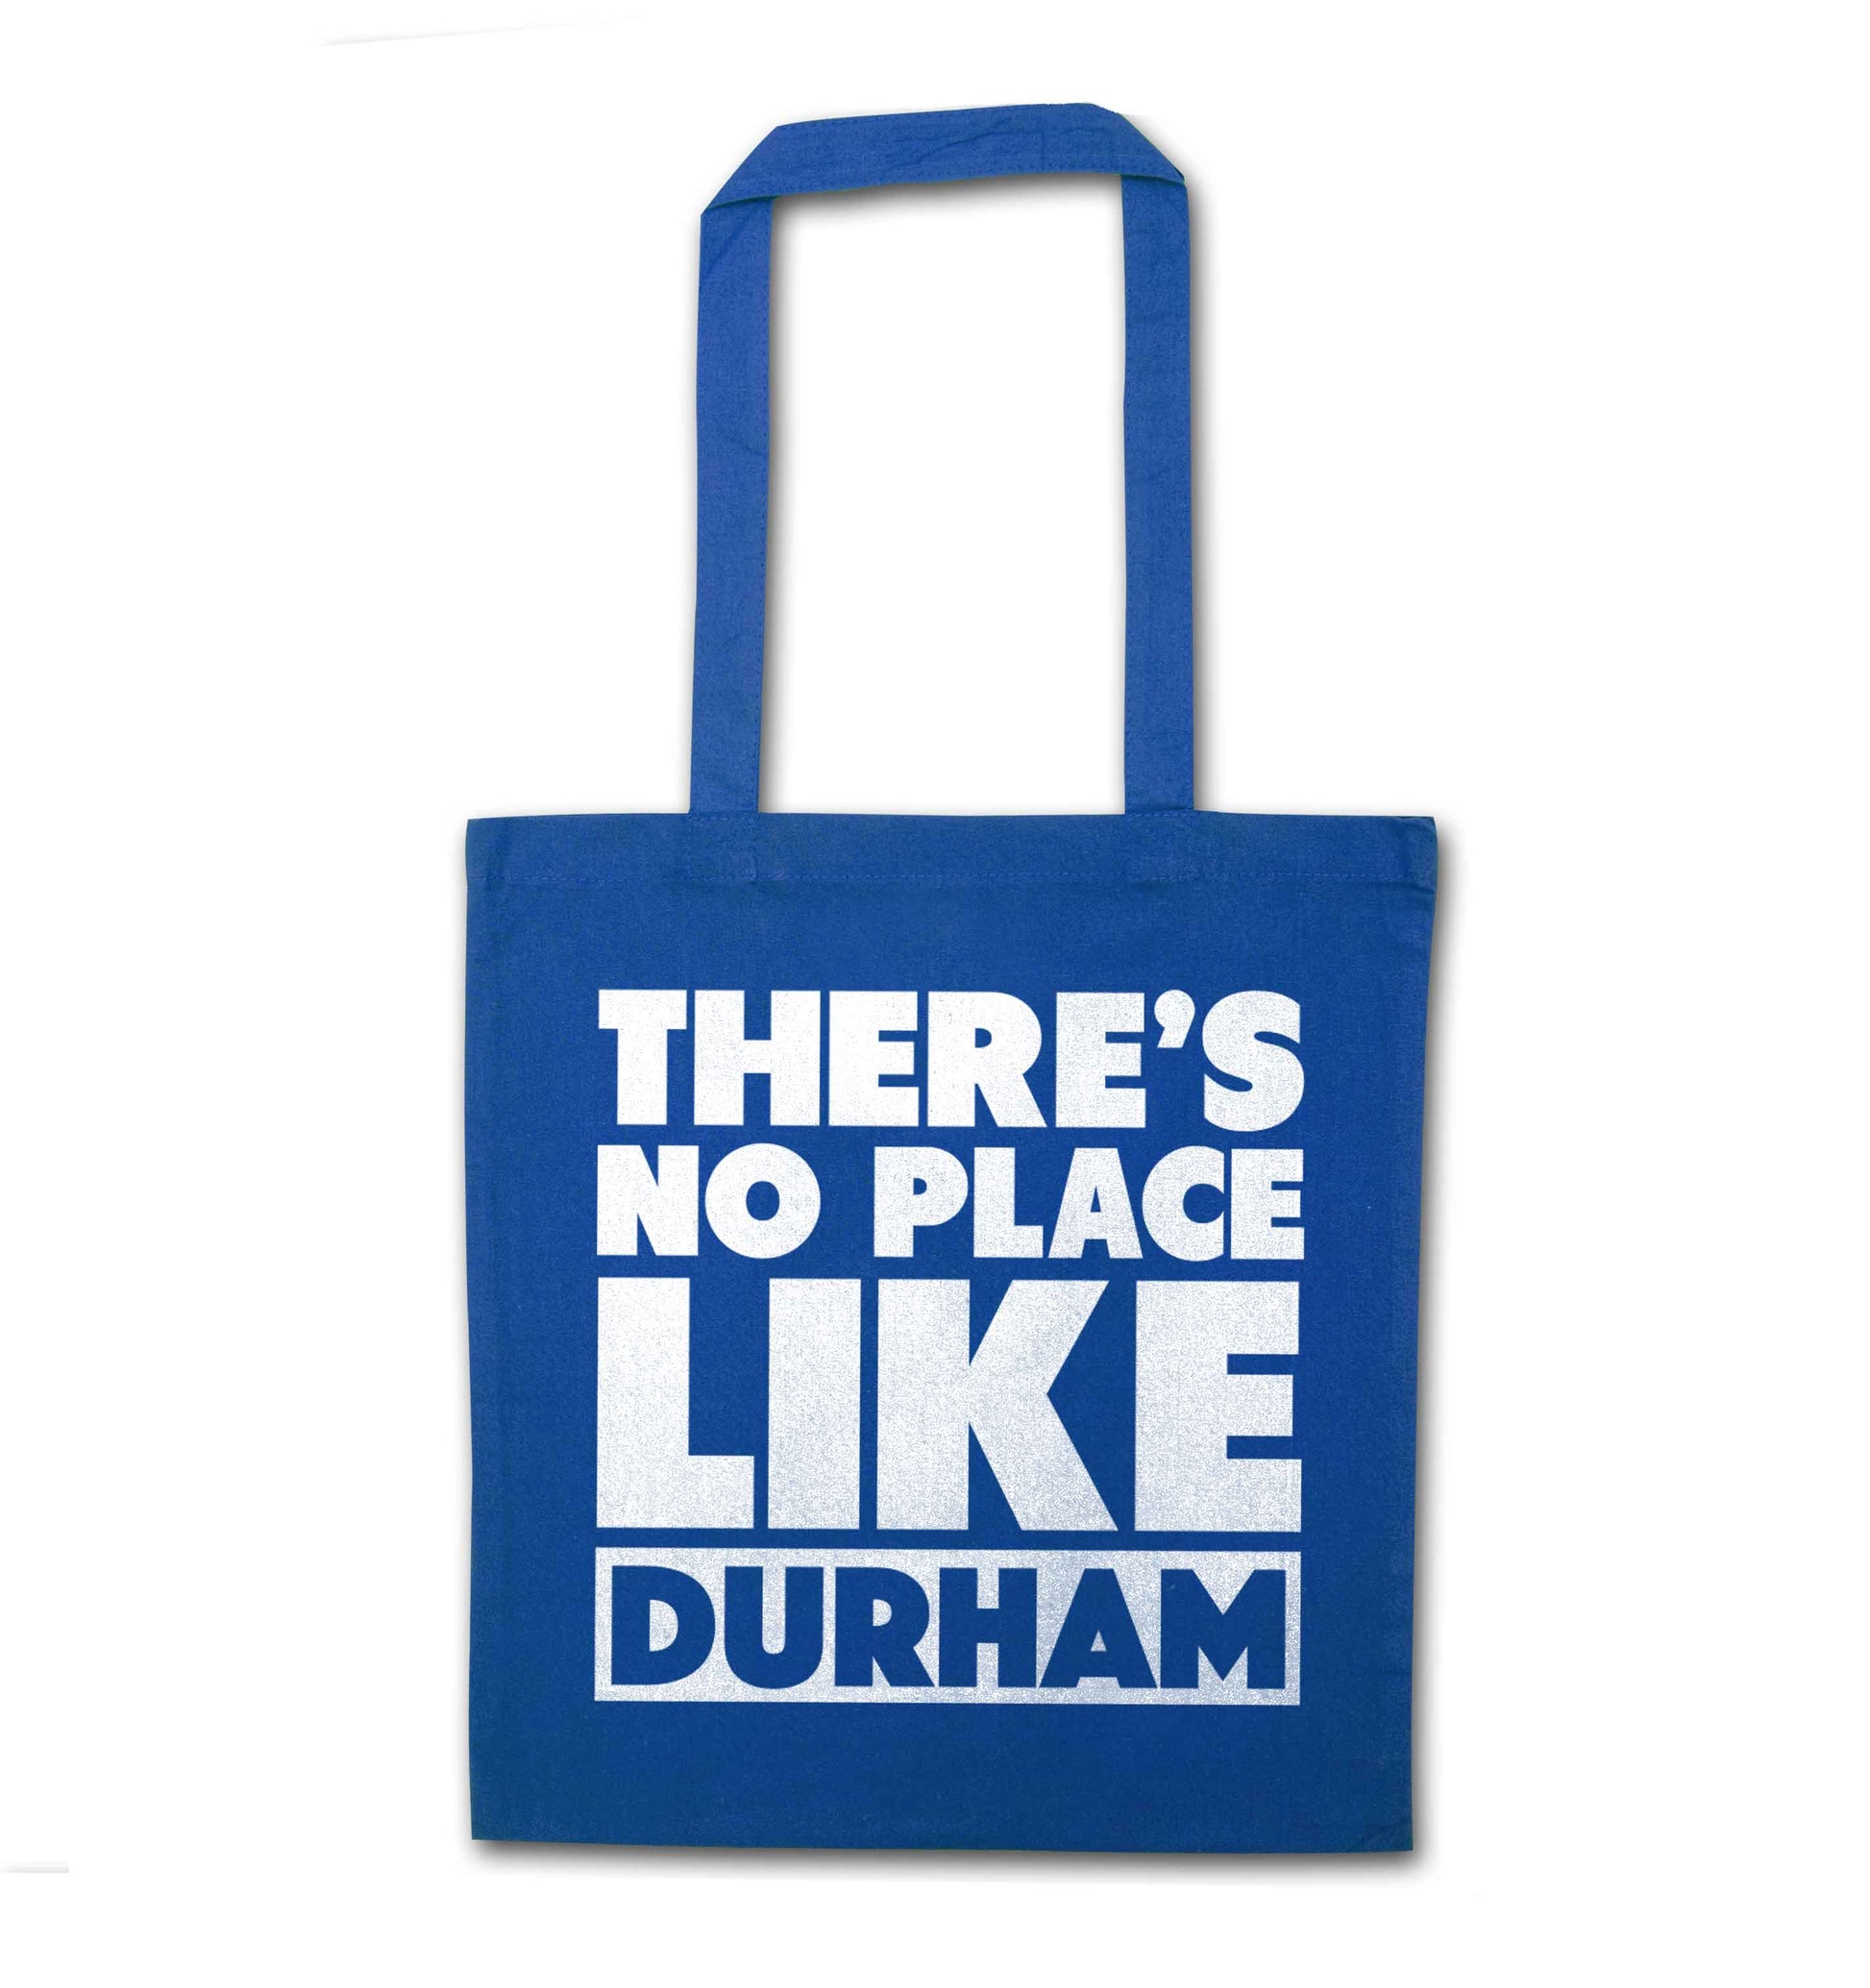 There's no place like Durham blue tote bag